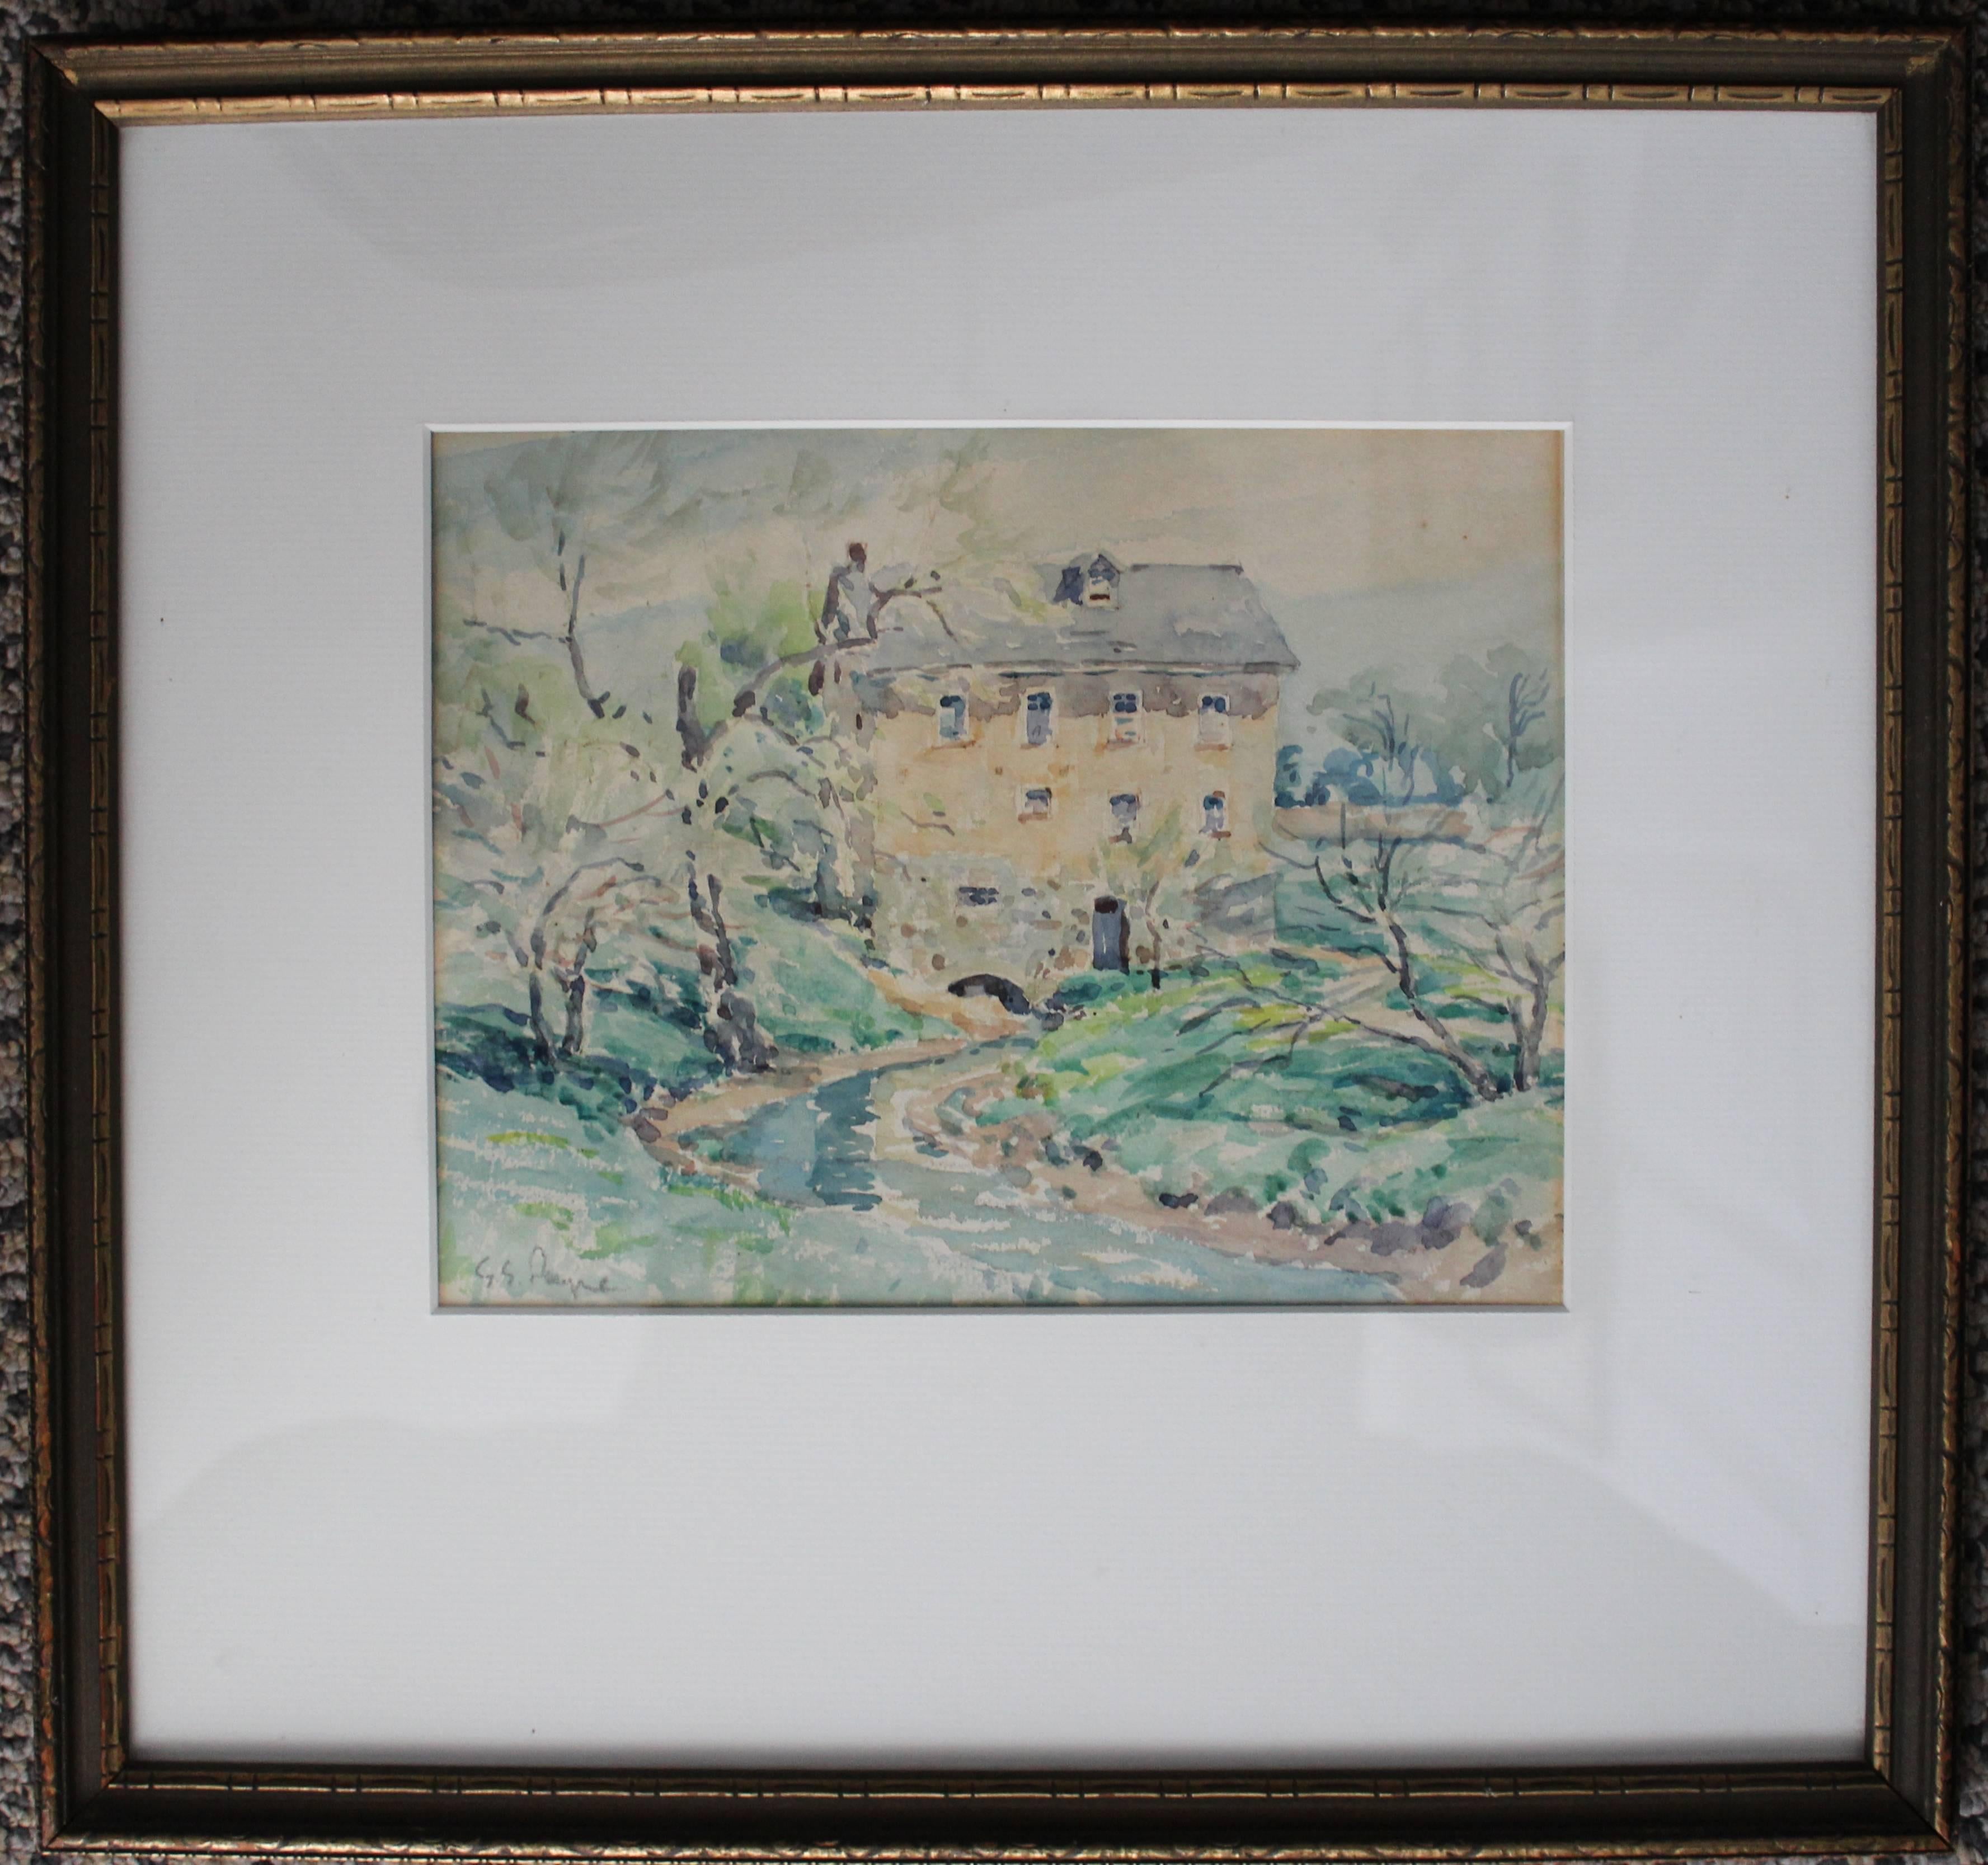 Gordon Eastcott Payne watercolour painting (Canadian 1890-1983).

Gordon Payne was born in Payne's Mills, Ontario in 1890. He studied art under Mary COX at the School of Fine Arts, New York and under George Reid, J. W. Beatty and William